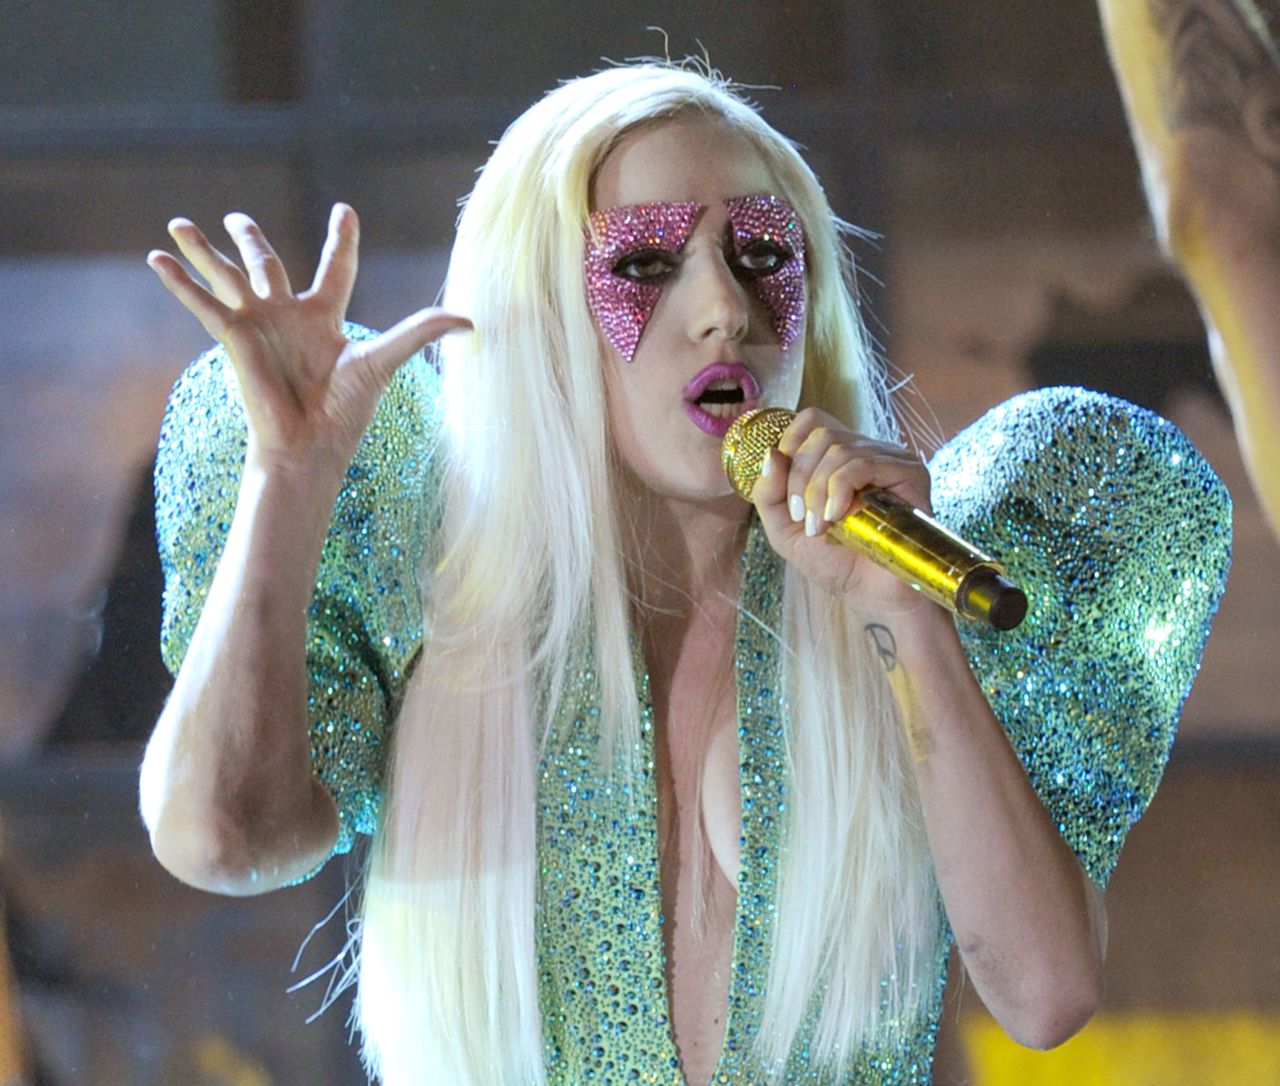 Lady Gaga onstage during the 52nd Annual Grammy Awards in 2010.